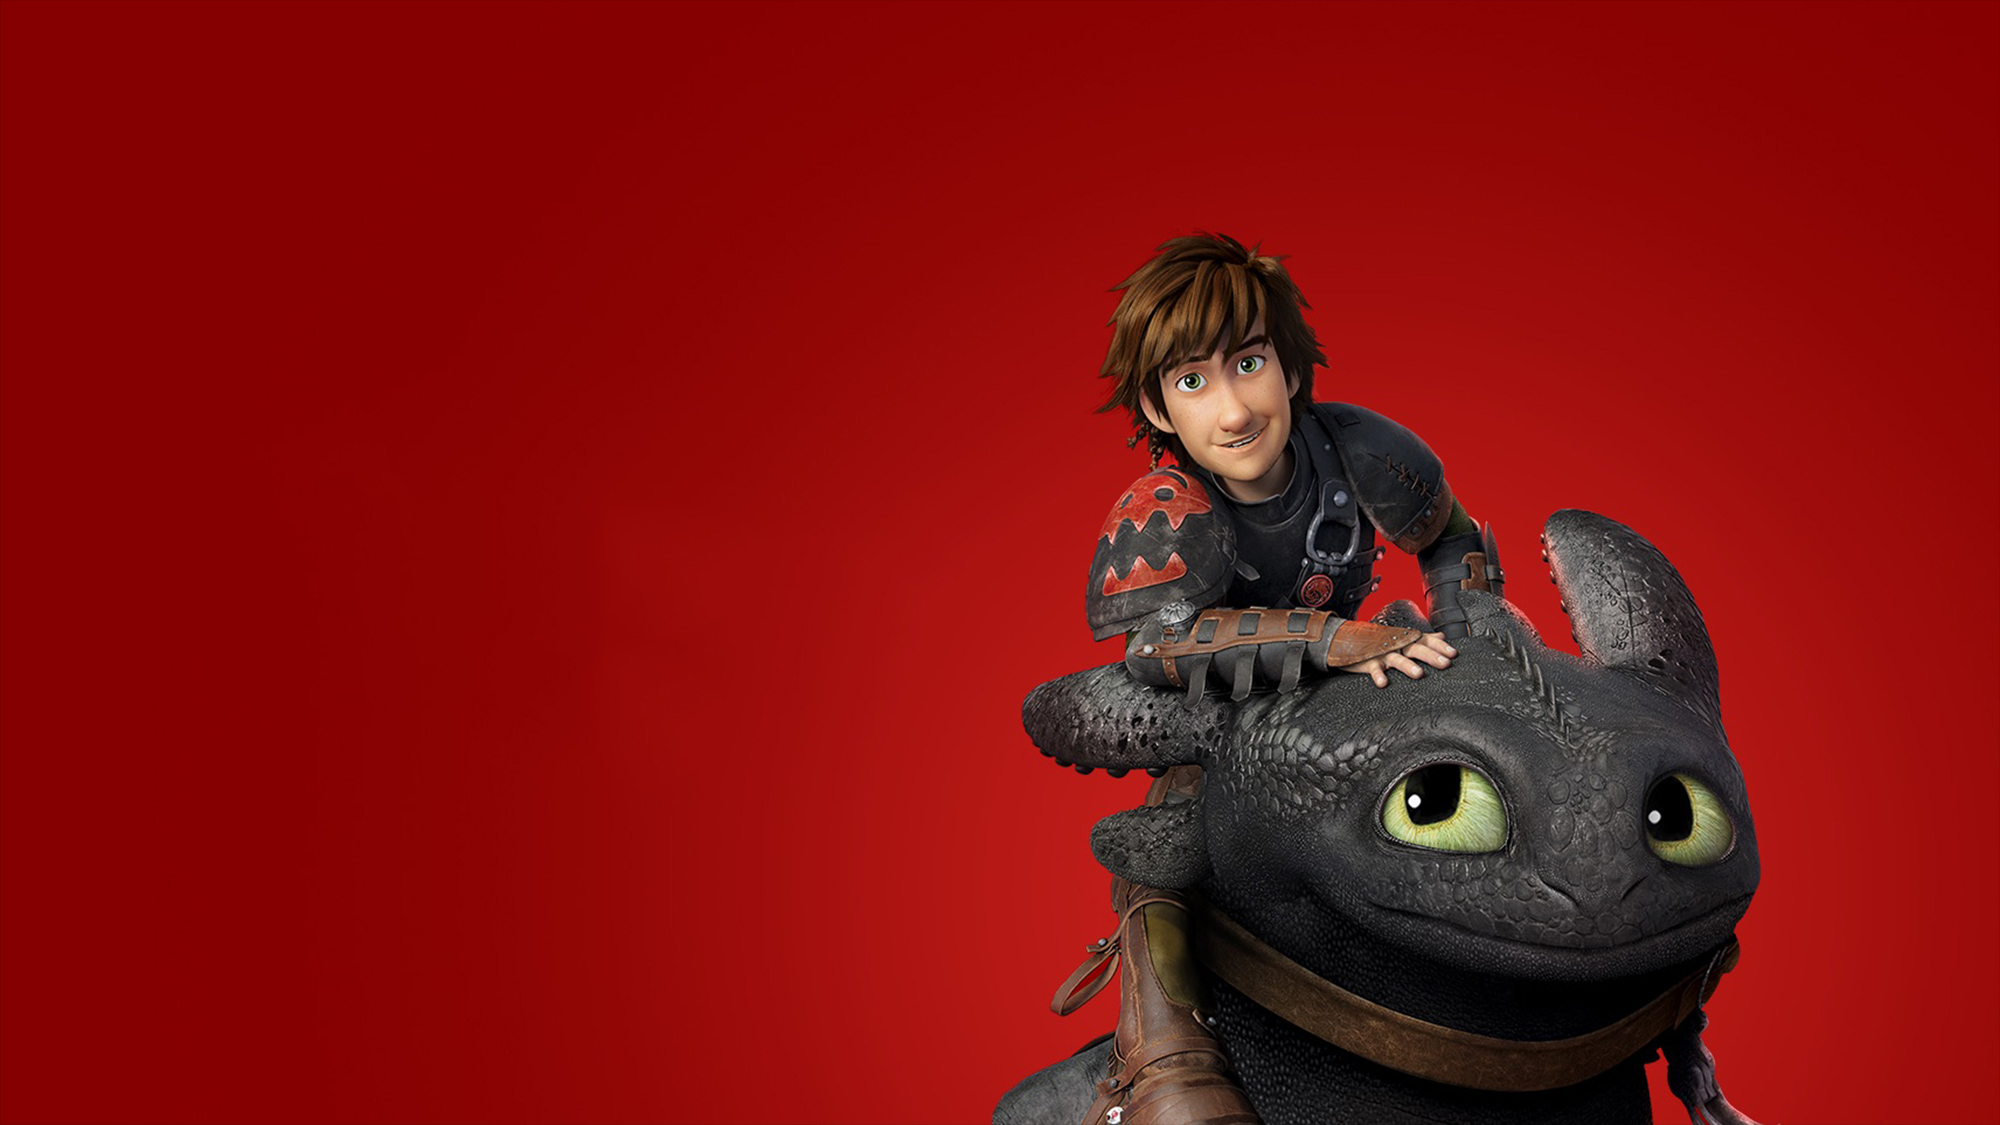 hiccup how to train your dragon 2 wallpaper